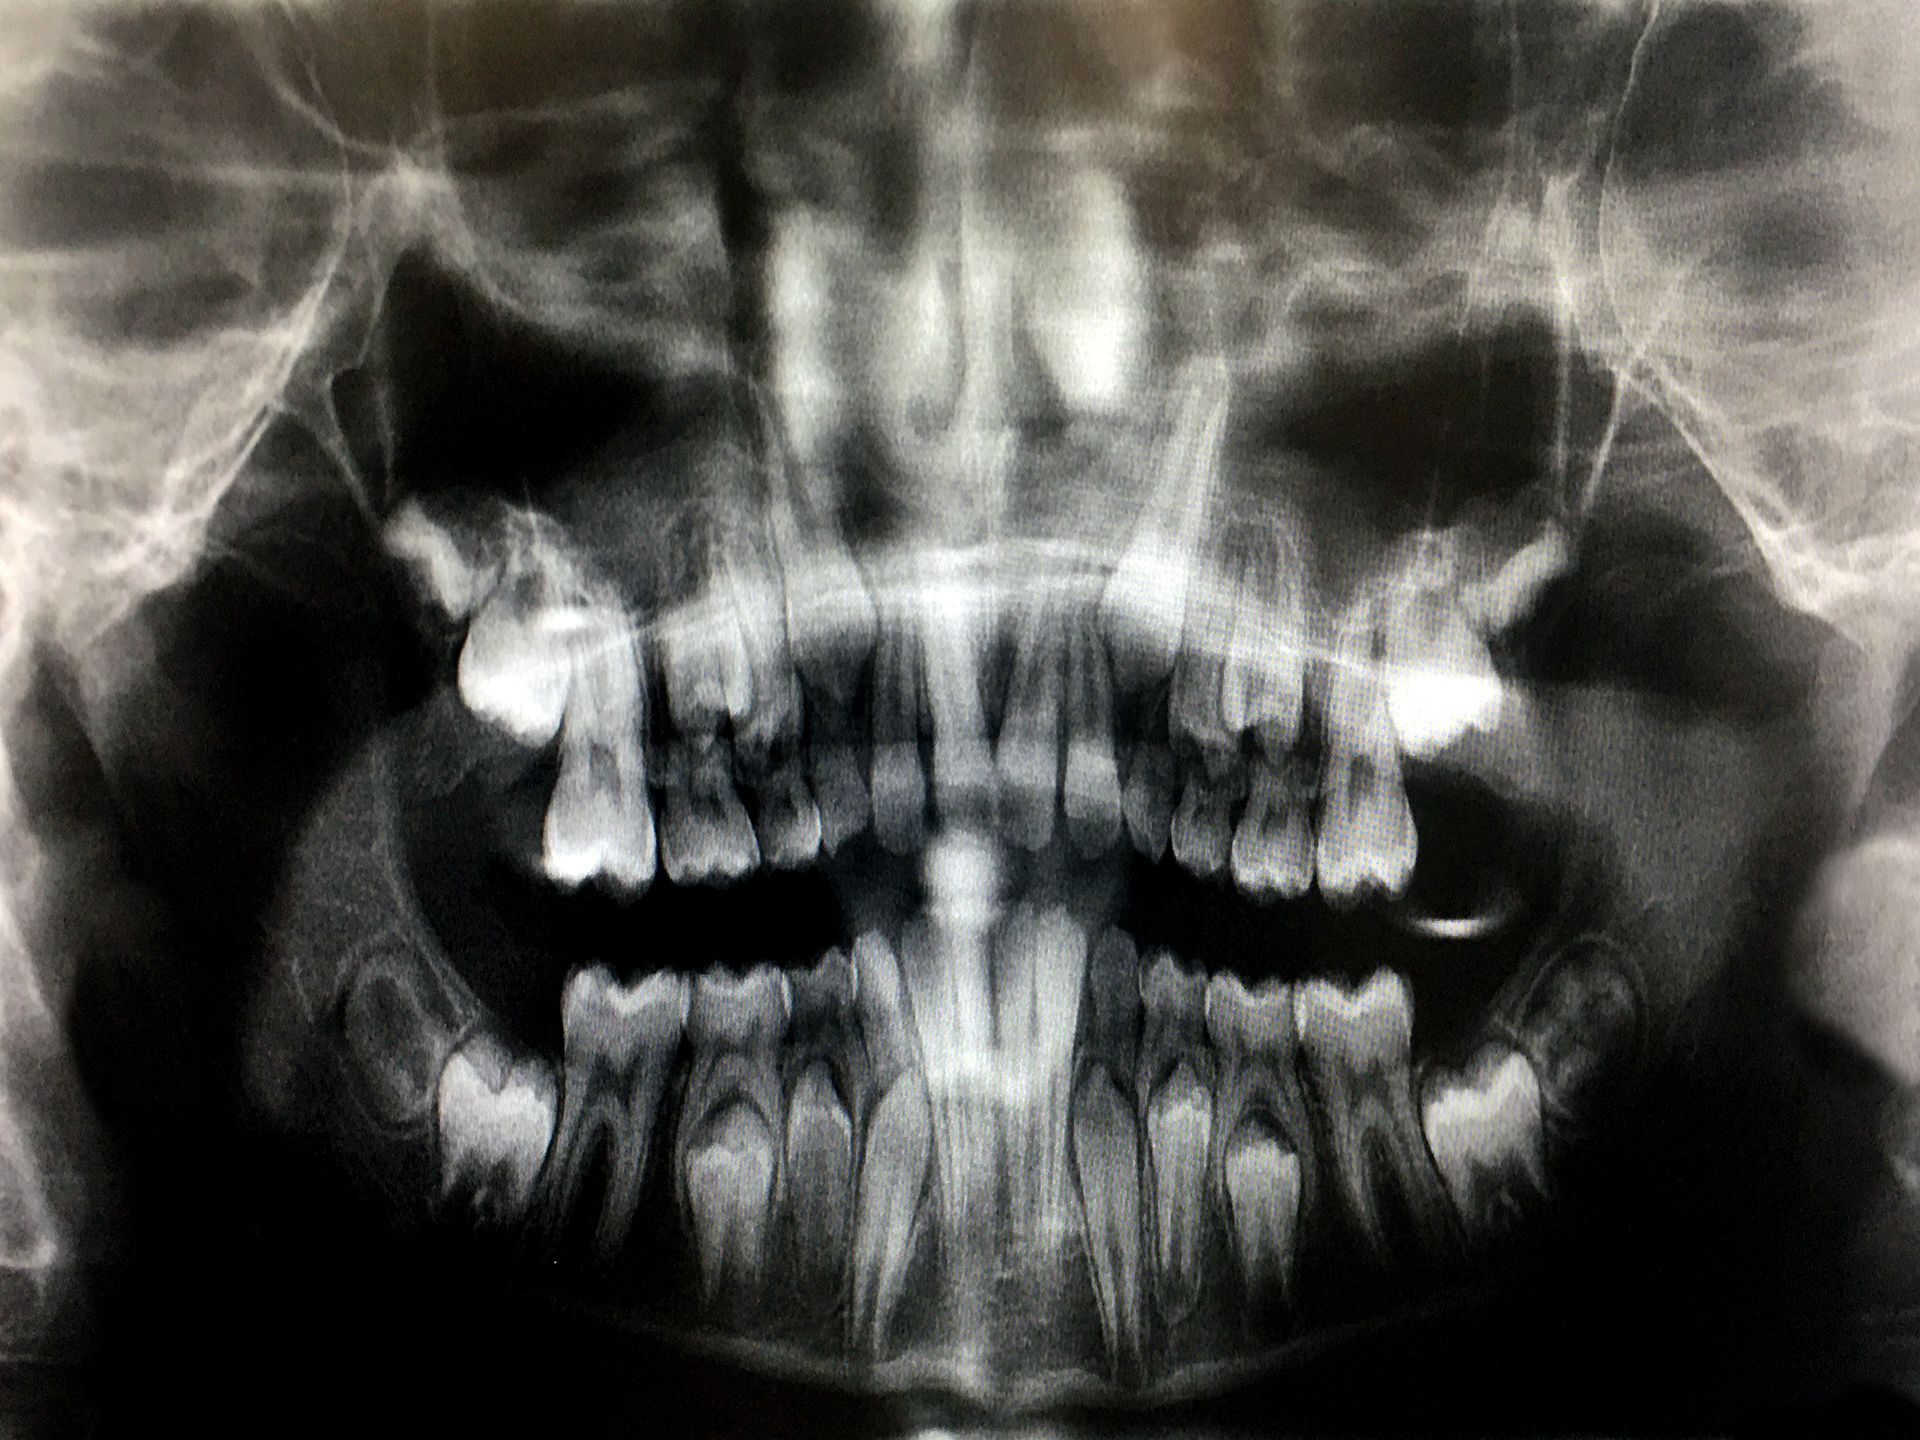 A black and white x-ray of a person 's teeth.